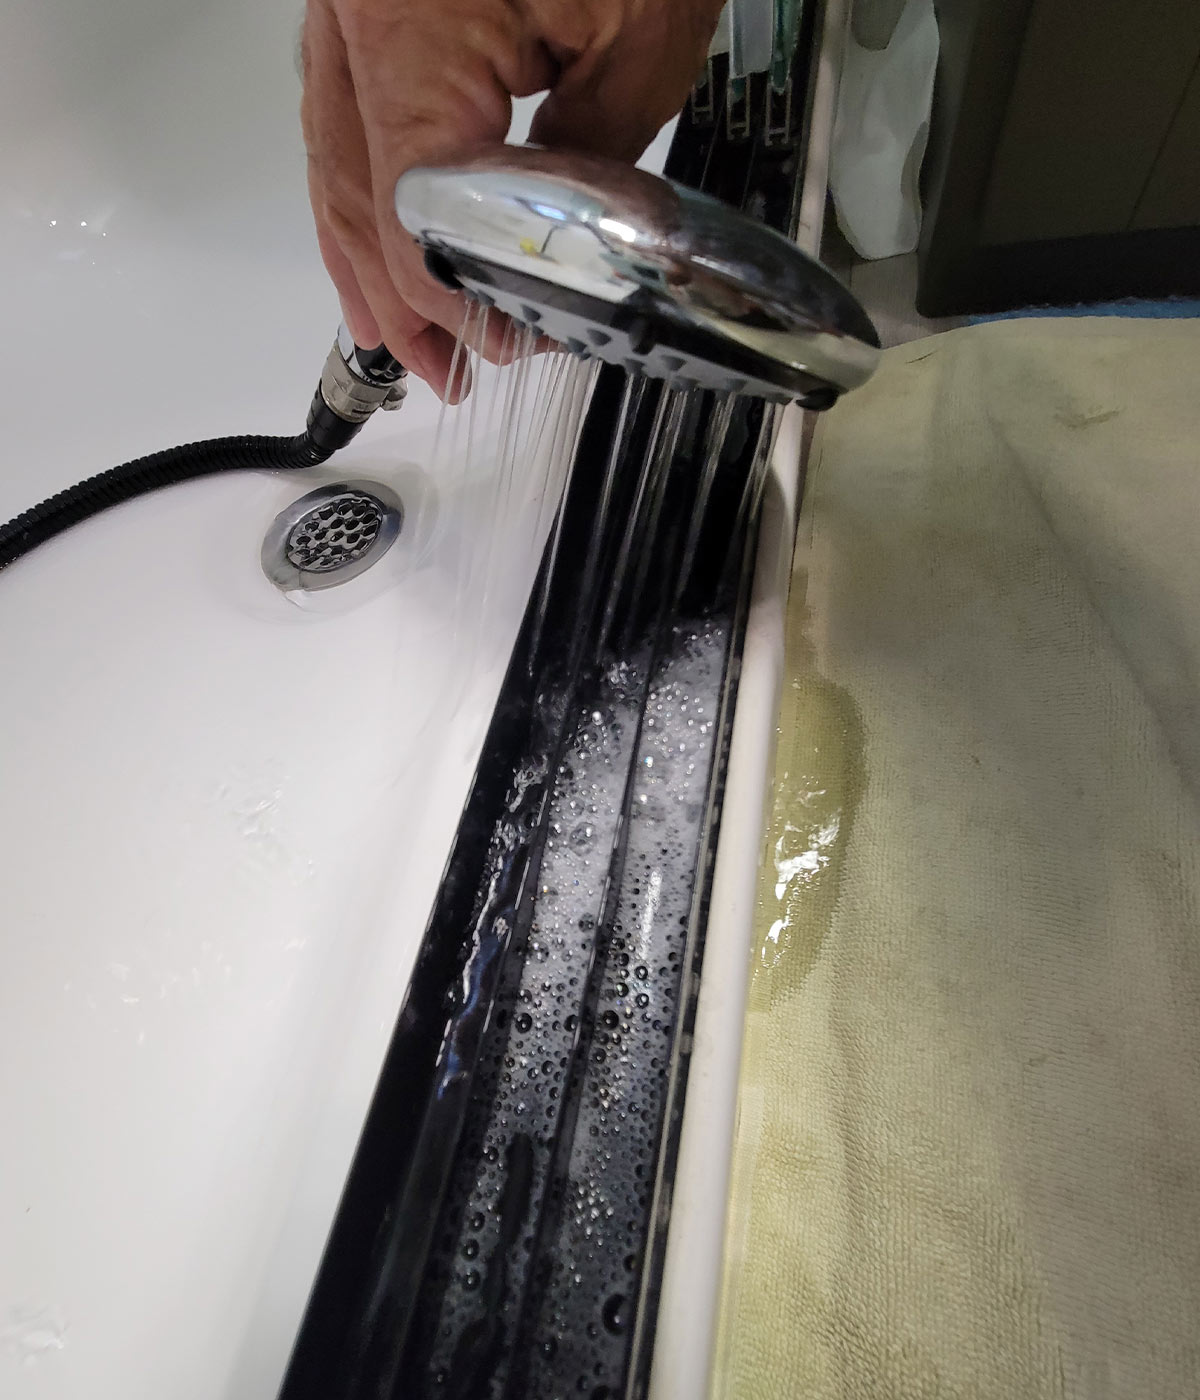 the RV shower head is used to rinse the cleaning solution and debris from the shower tracks, causing a slight spill